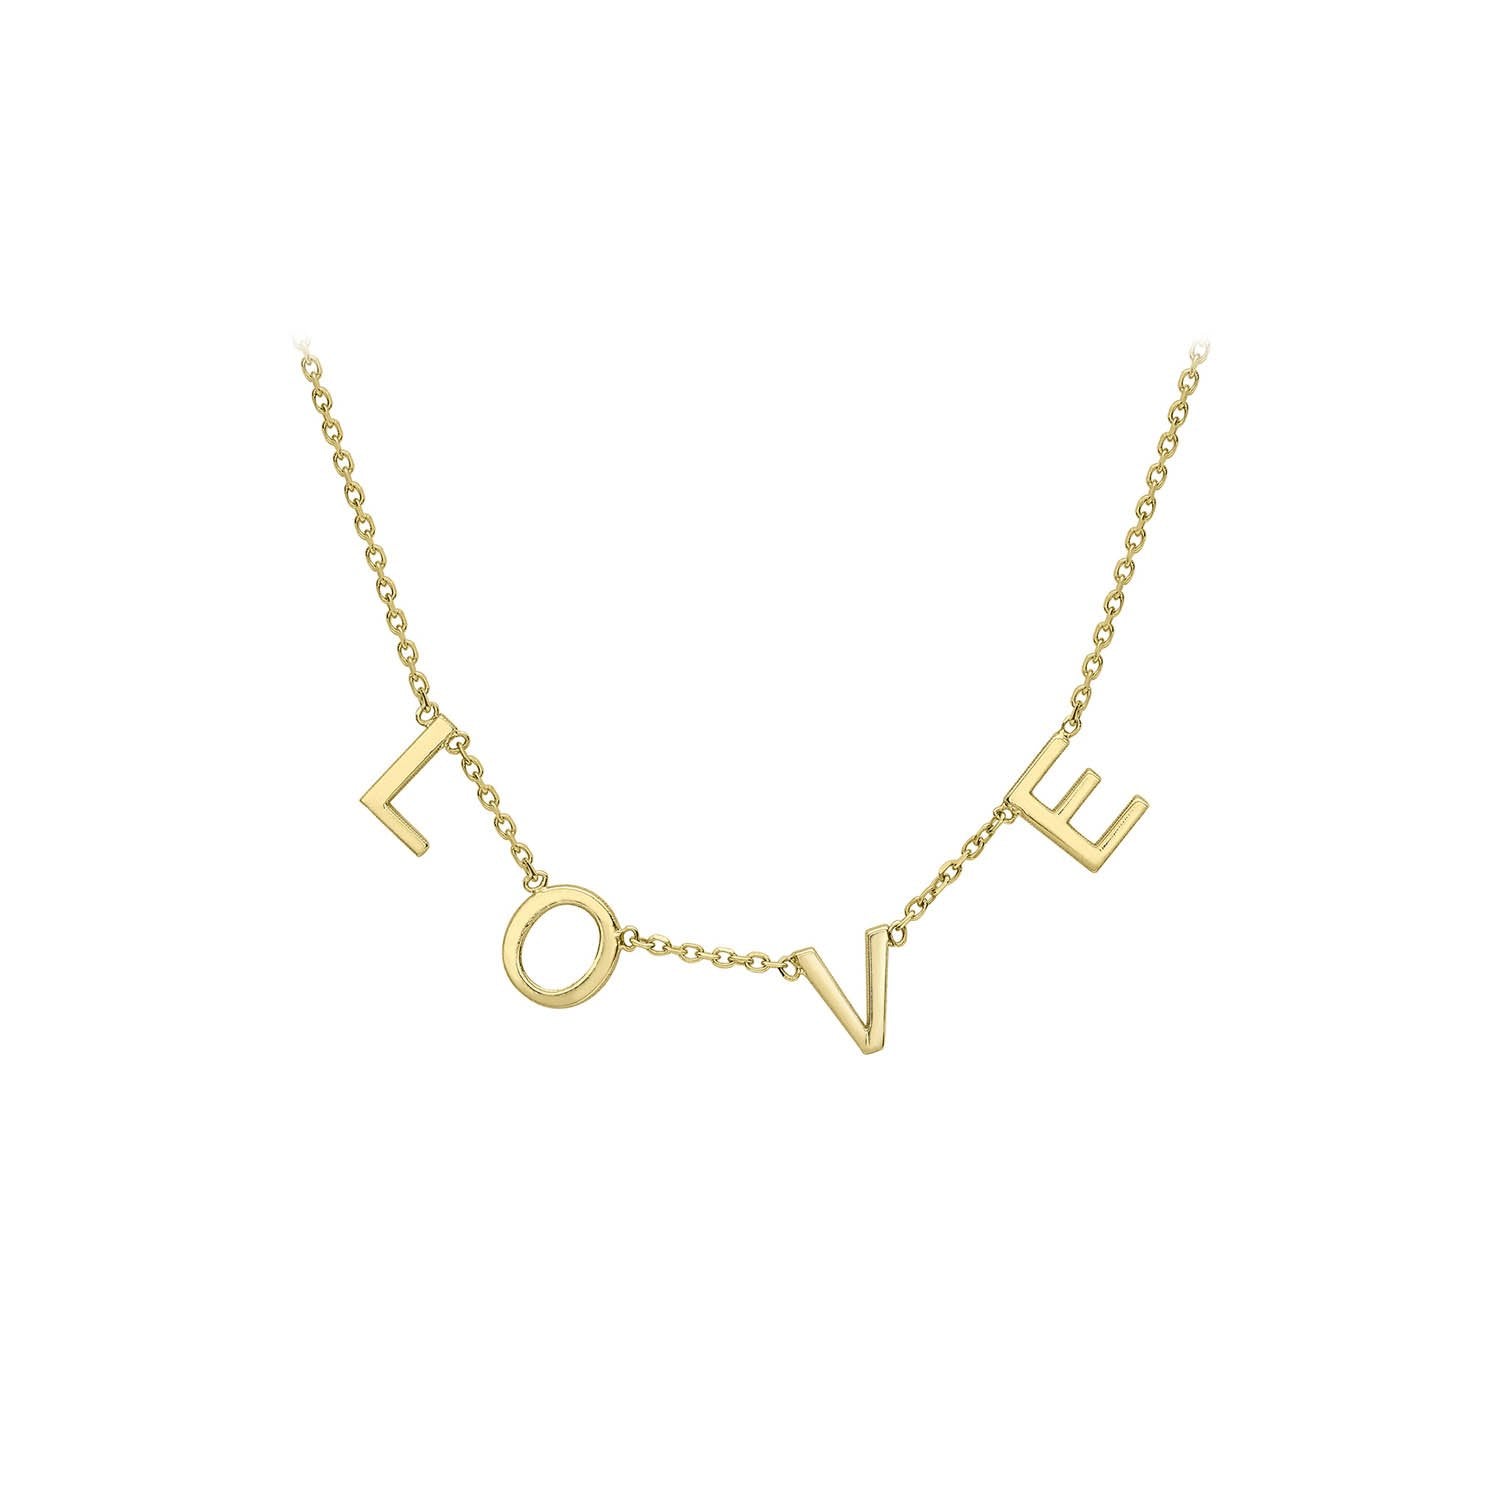 9ct Yellow Gold 5mm 'Love' Adjustable Necklace 38cm-43cm